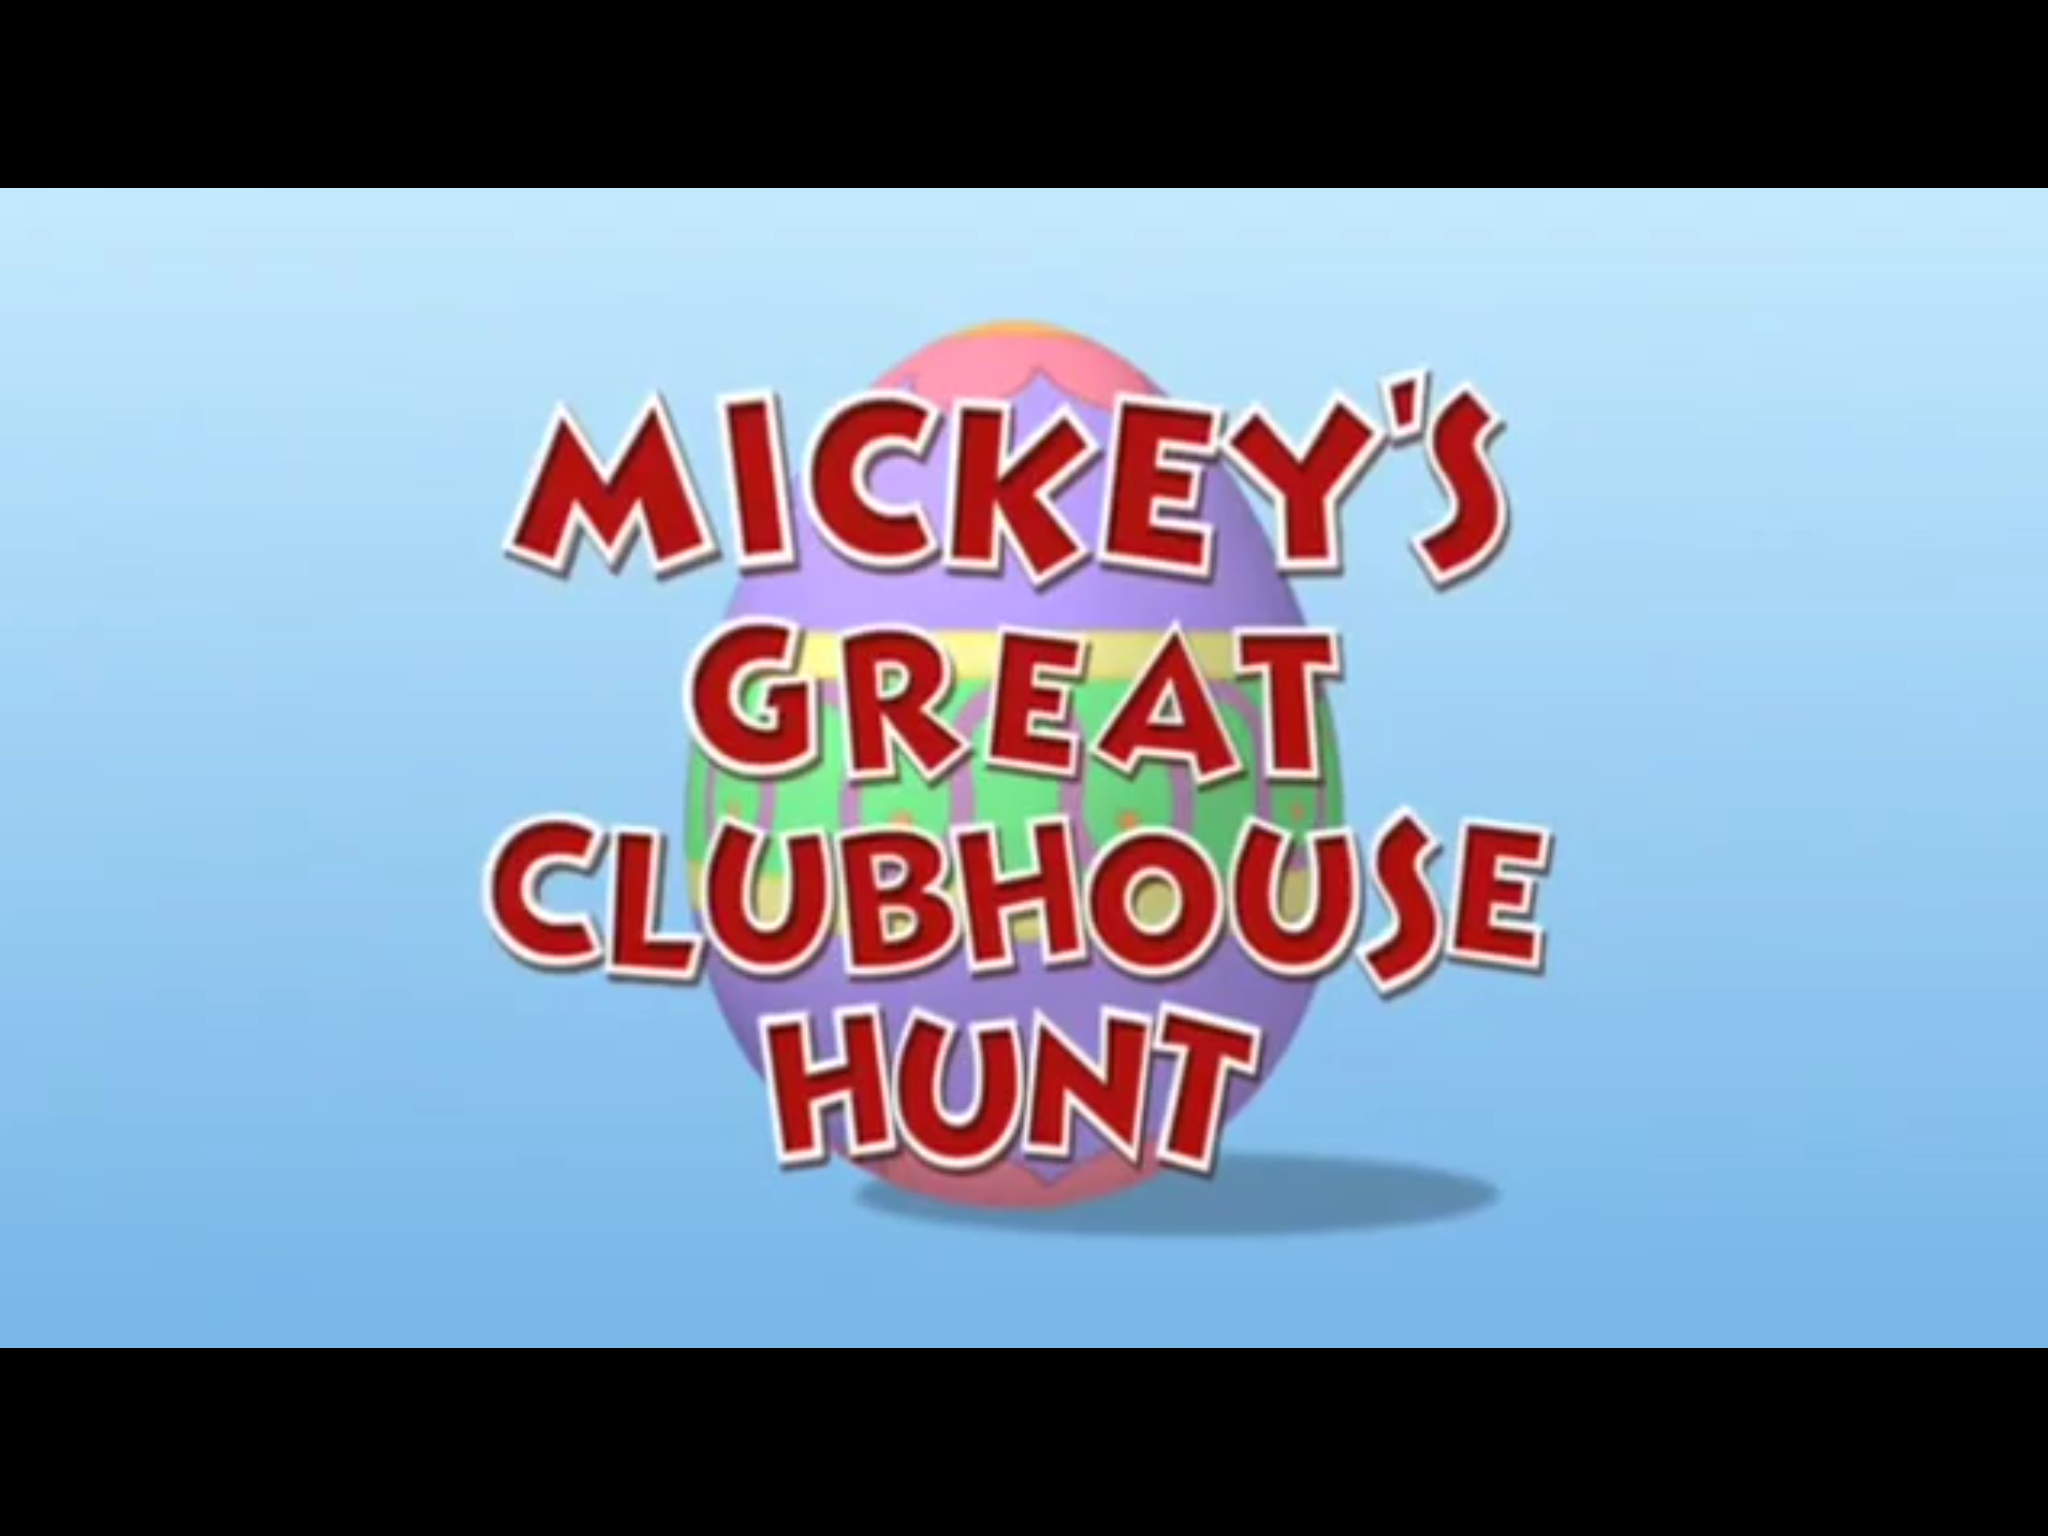 Donald's Big Balloon Race, S1 E4, Full Episode, Mickey Mouse Clubhouse